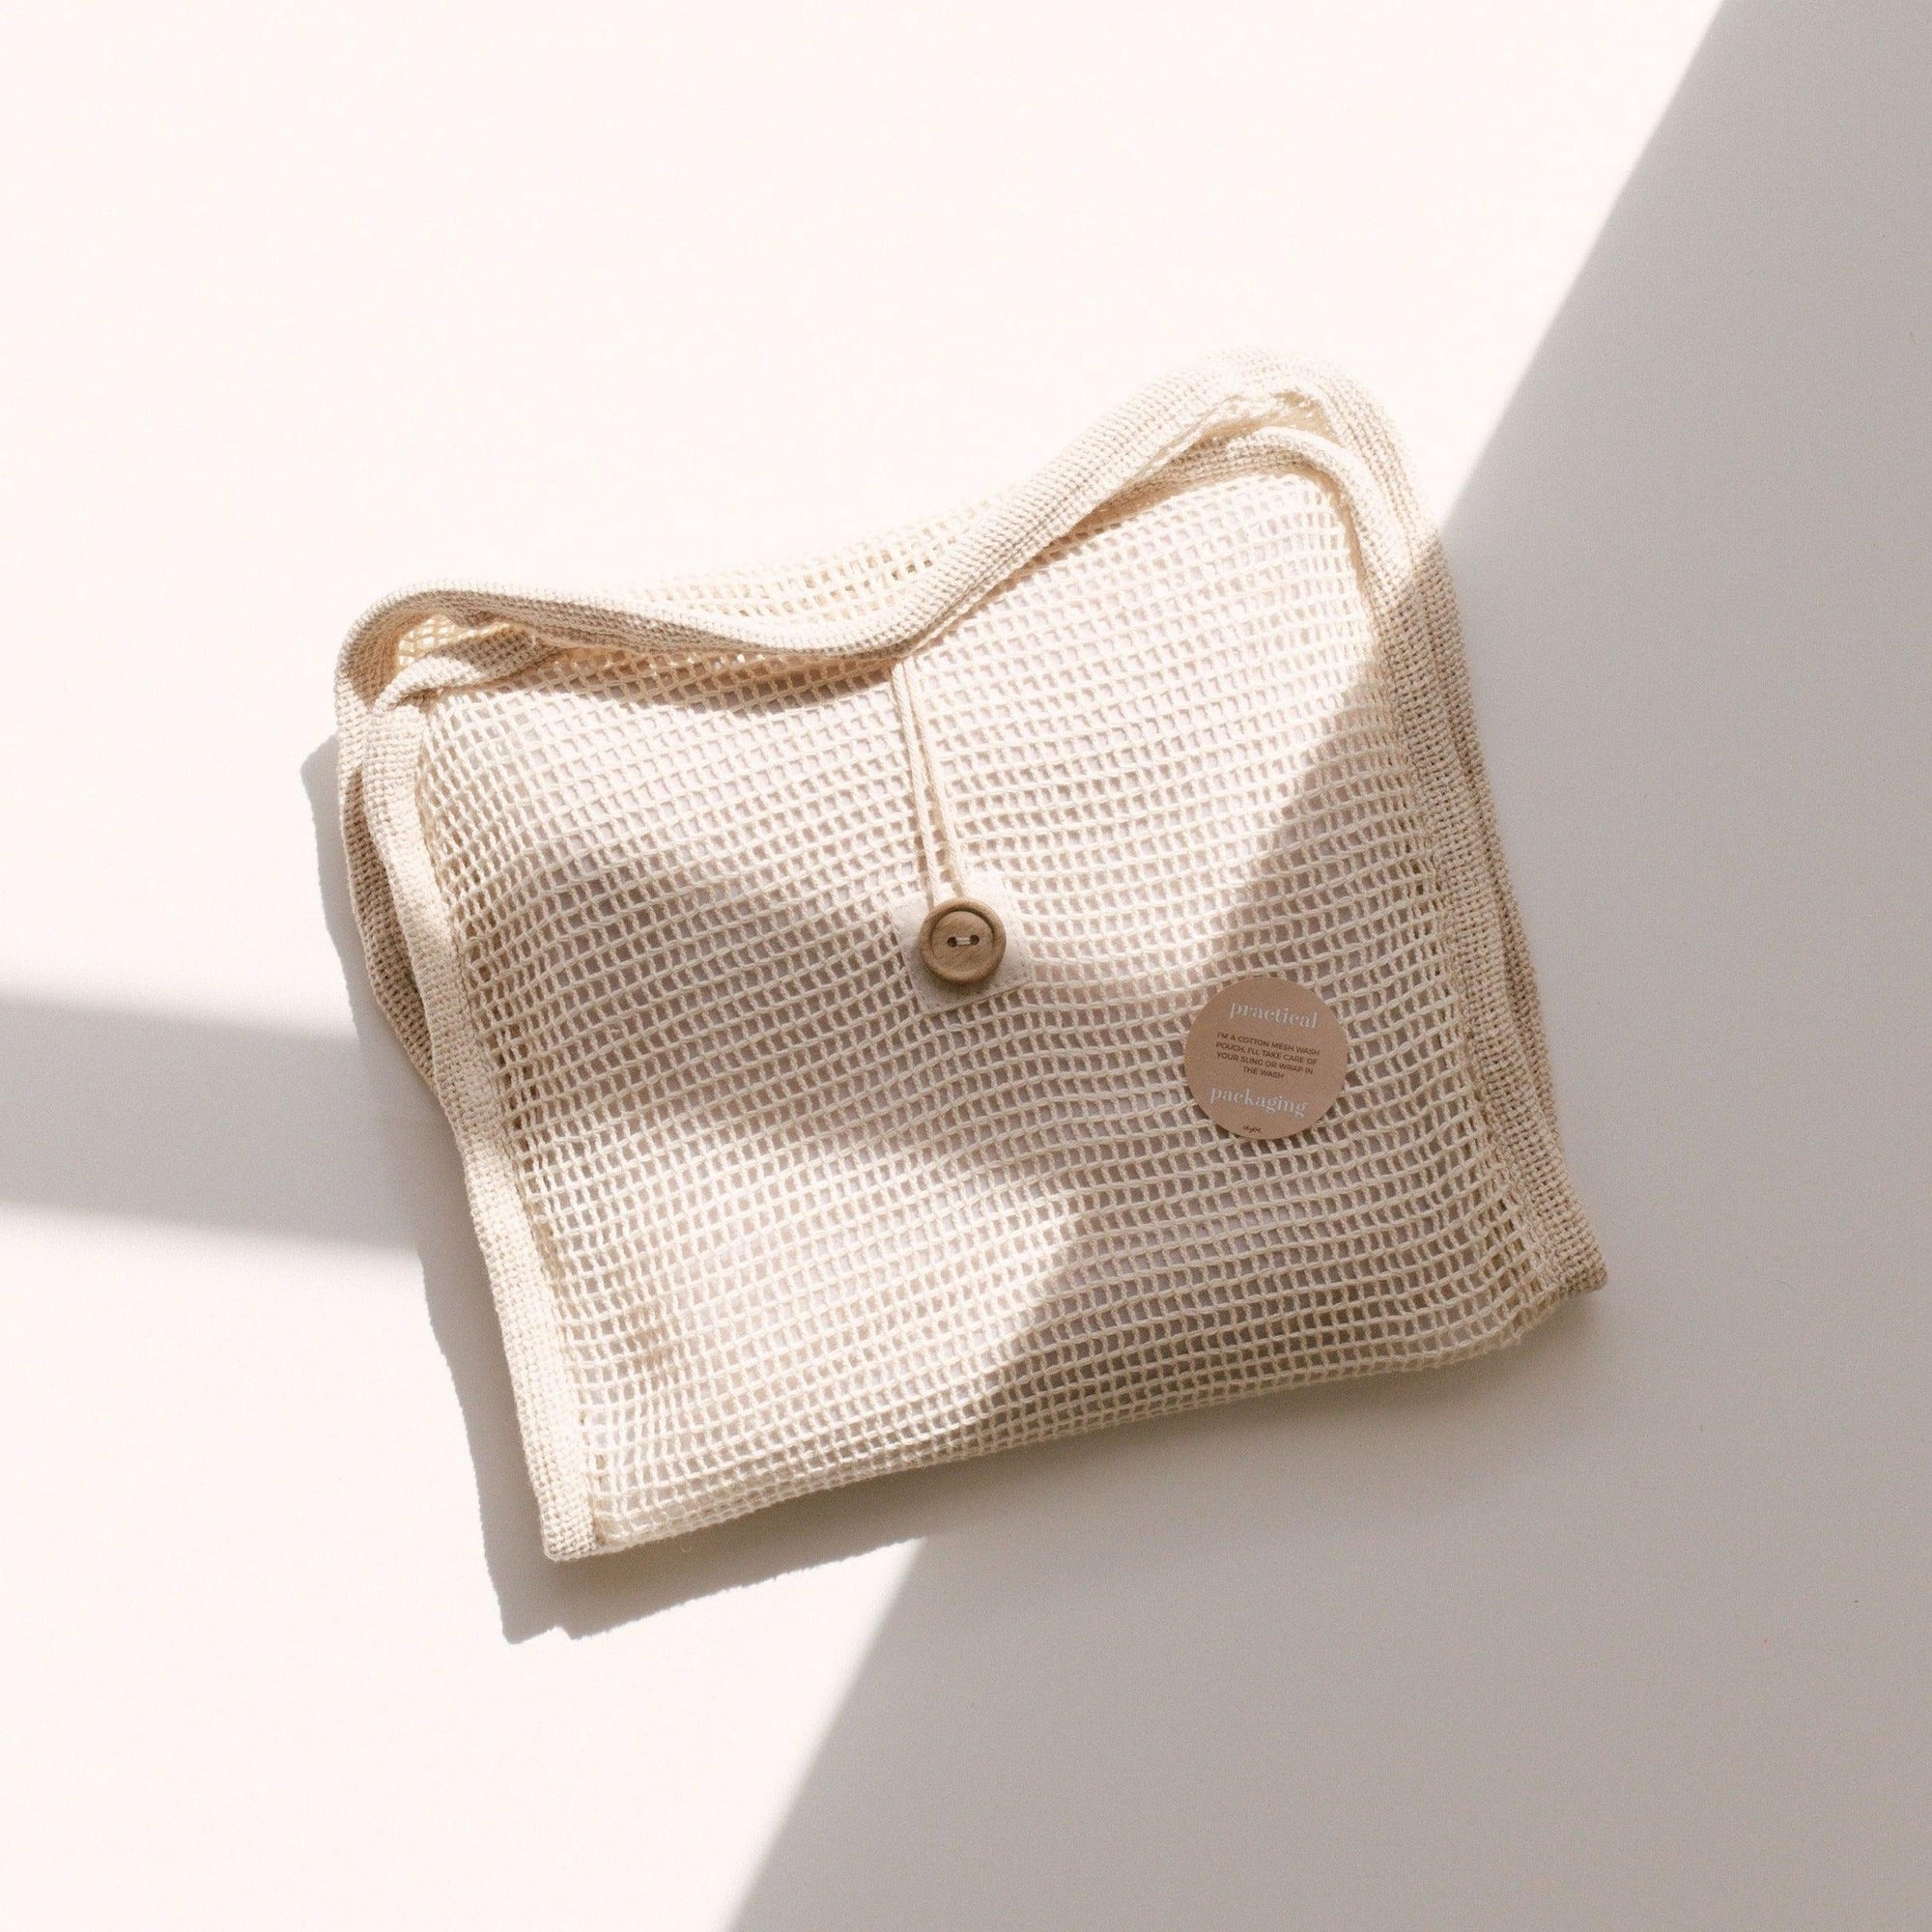 A beige bag by Chekoh on a white surface.